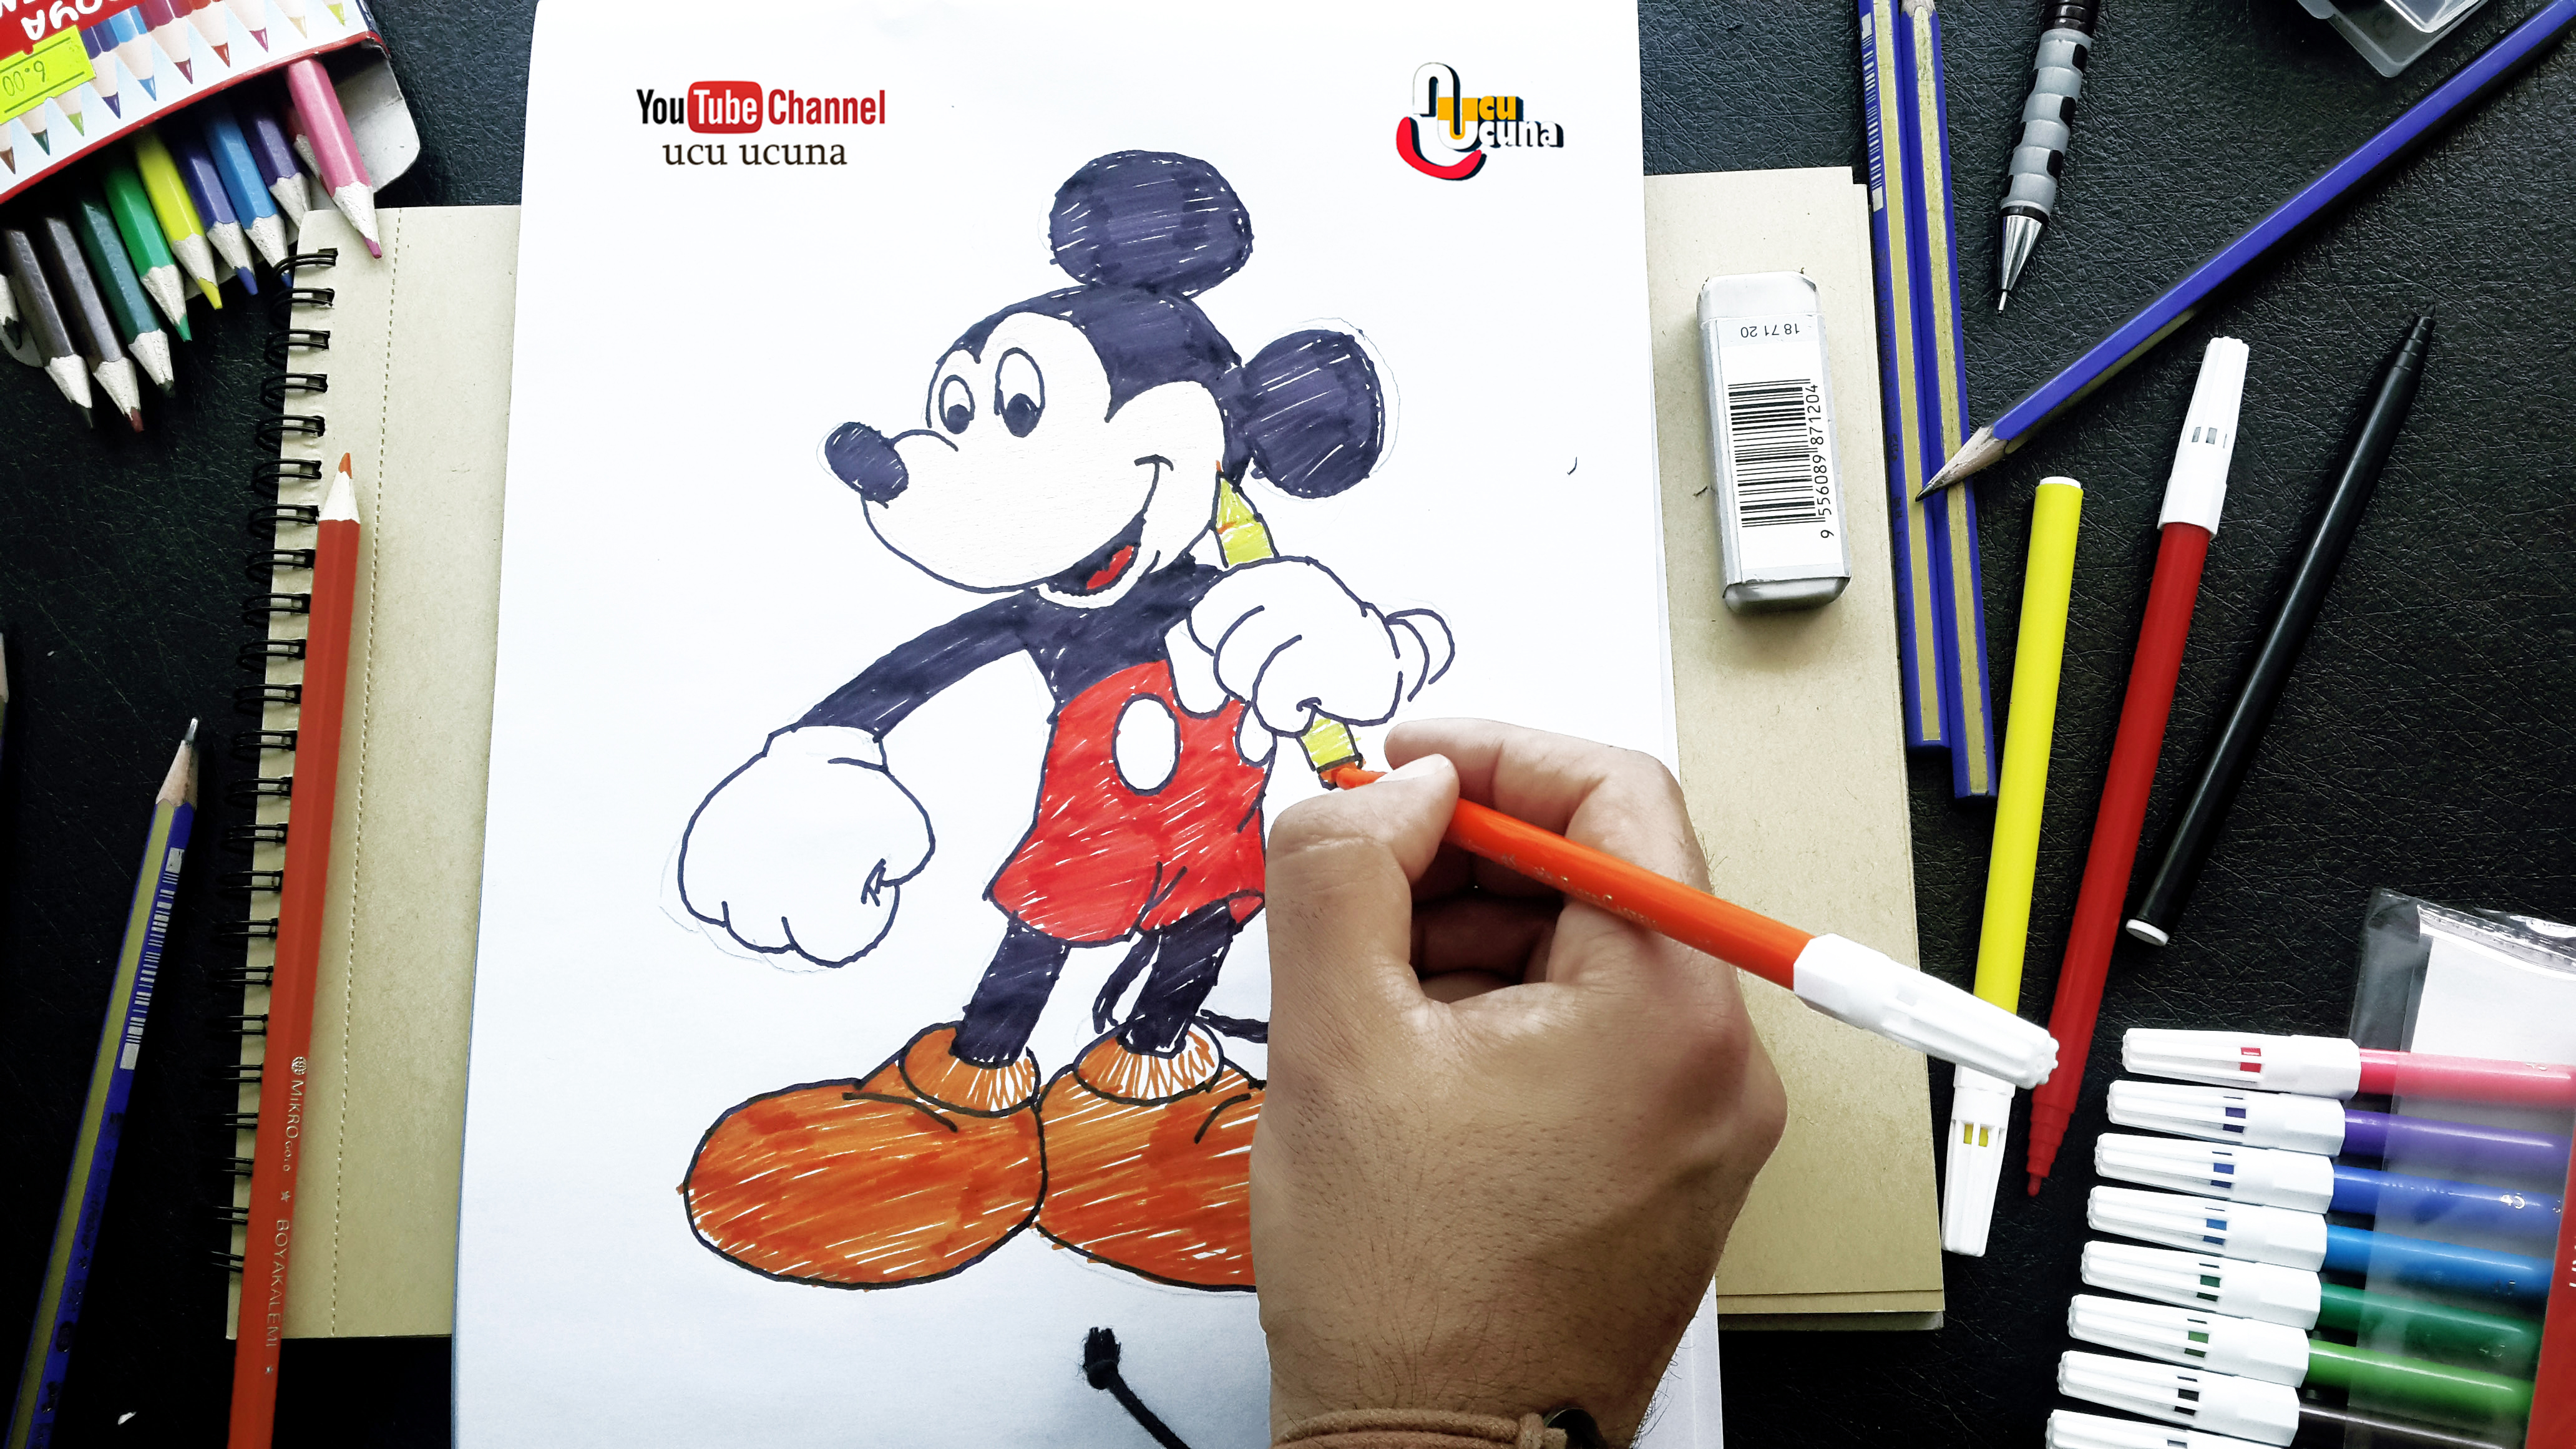 Hi everyone i ll be showing you how to draw mickey mouse step by step Let s learn draw for  kids  art  important at my life  drow  with me i hope you like funny videos  tutorial if you like my draw you click my youtube channel ucu ucuna